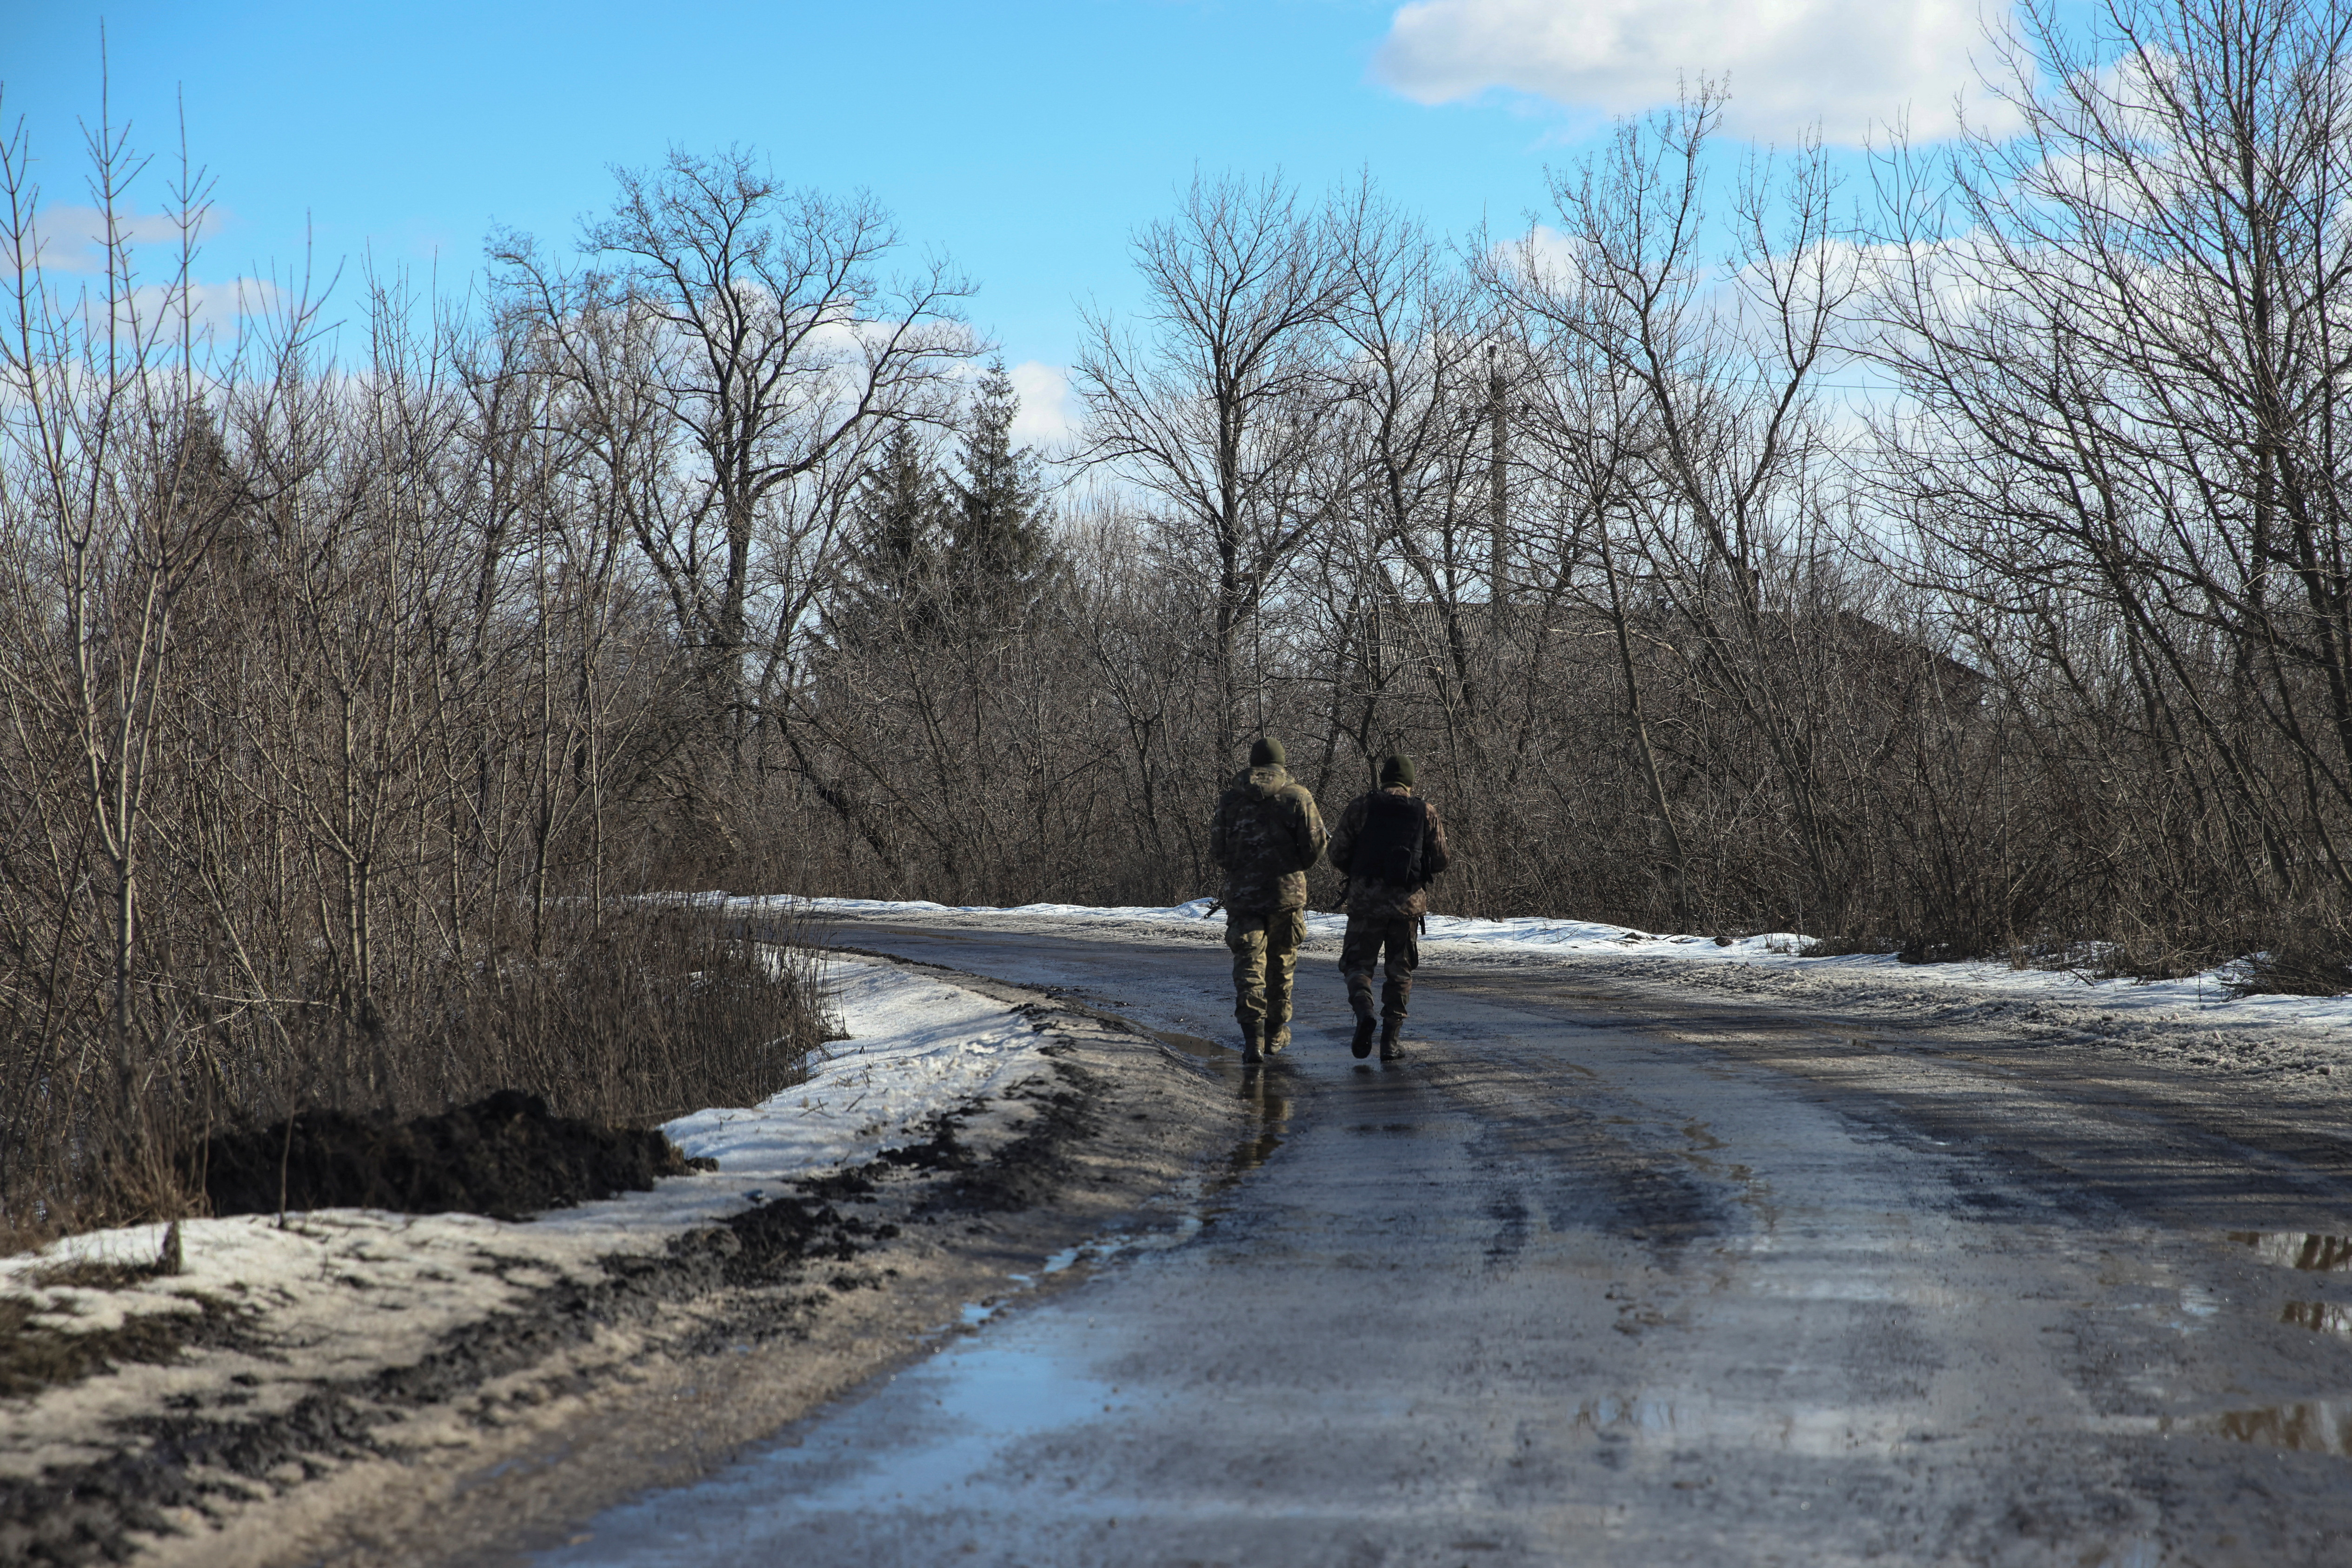 Ukrainian service members patrol an area in the town of Siversk